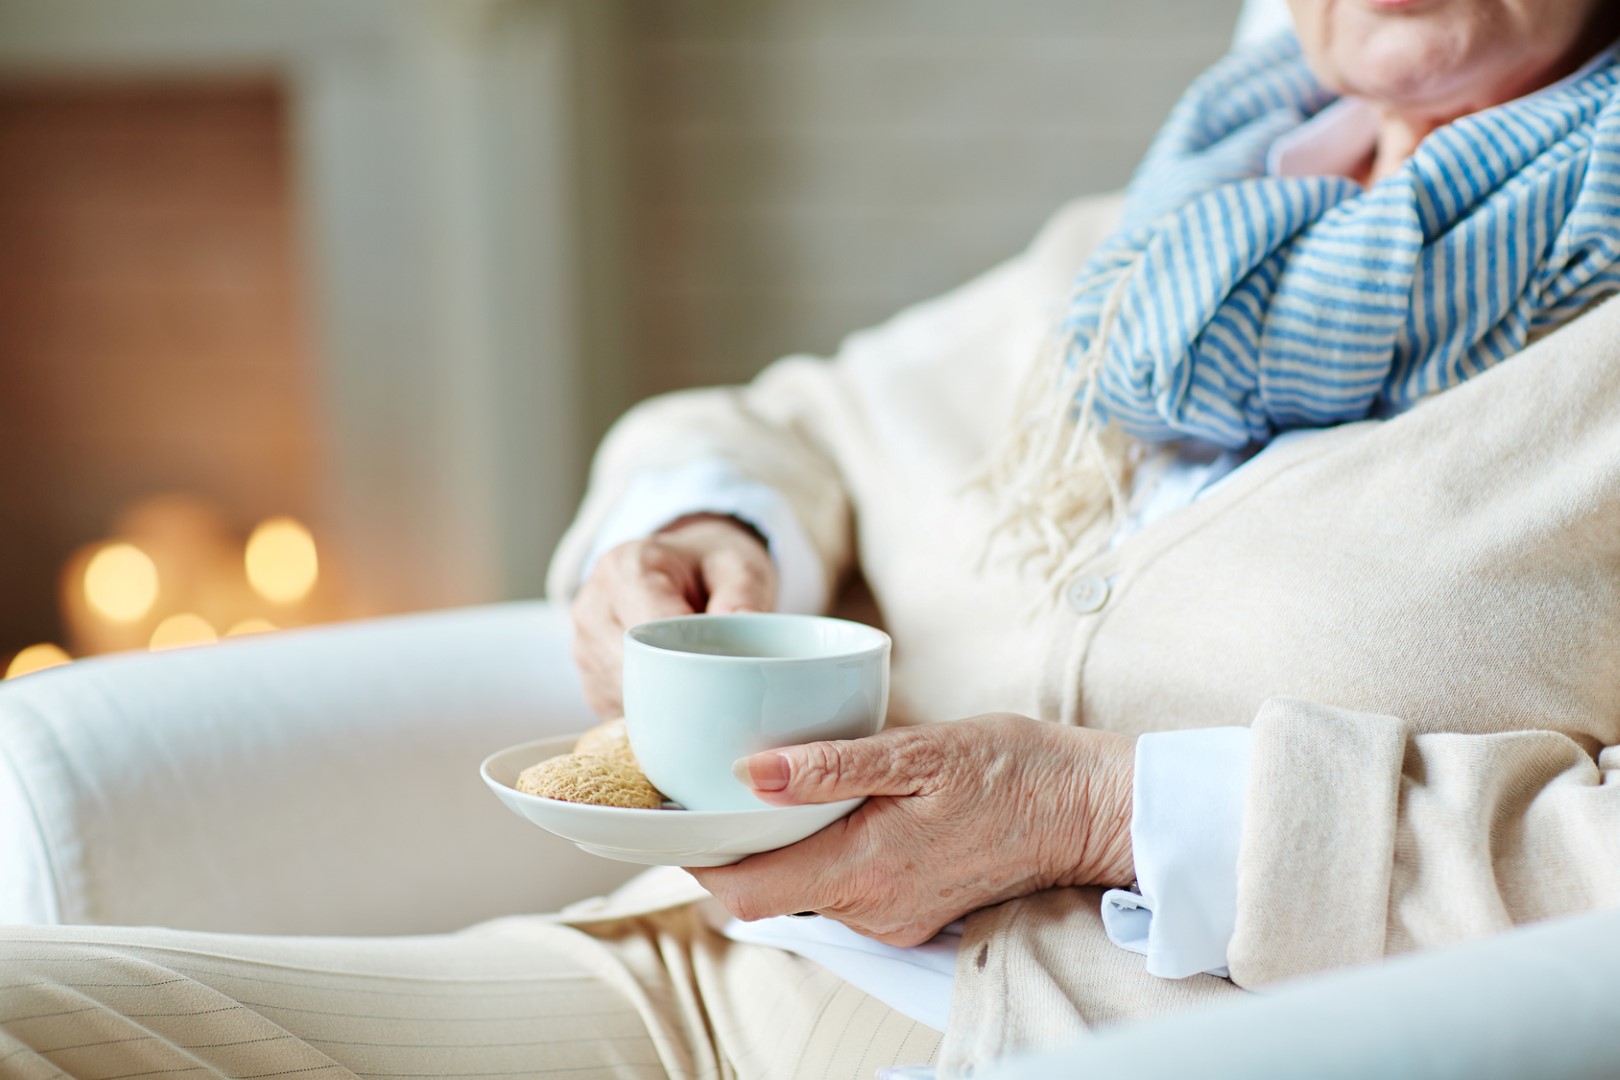 Cup of tea in hands of senior woman home care